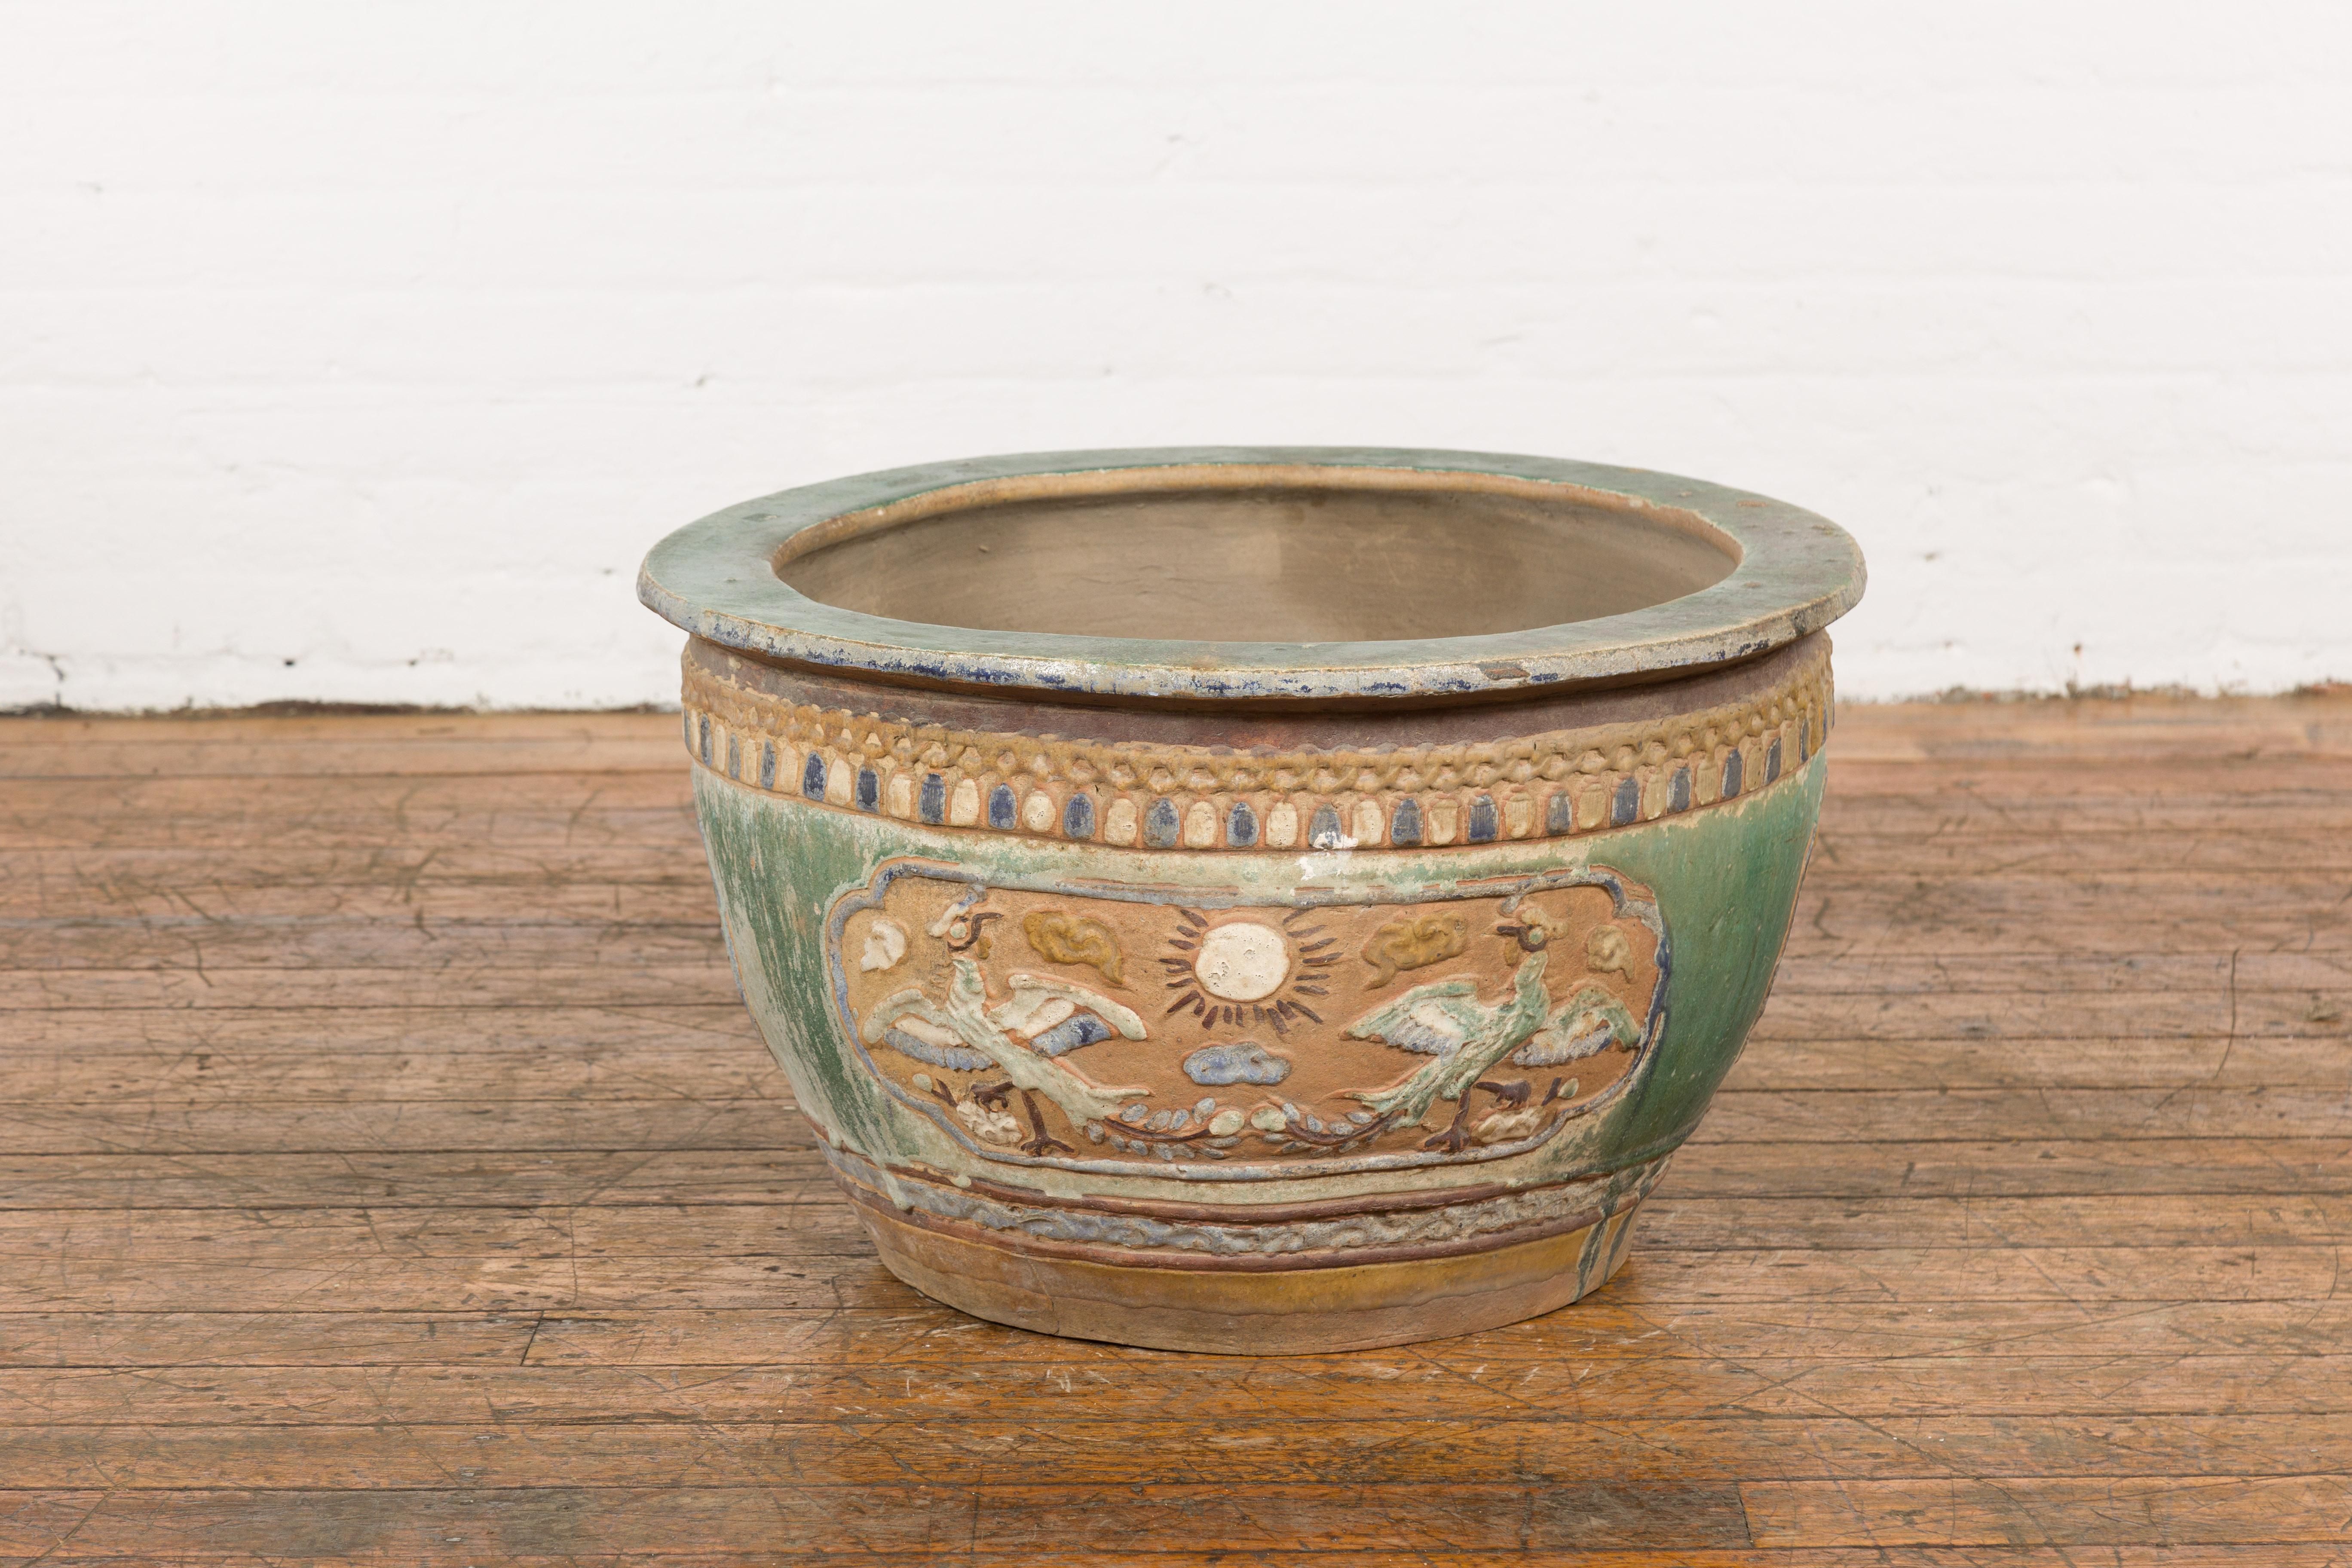 An antique 19th century Annamese green, blue and ocher glazed planter from Vietnam with birds, sun, scrolling clouds, trees and deer motifs, as well as a distressed patina. Immerse yourself in the rich cultural heritage of Vietnam with this antique